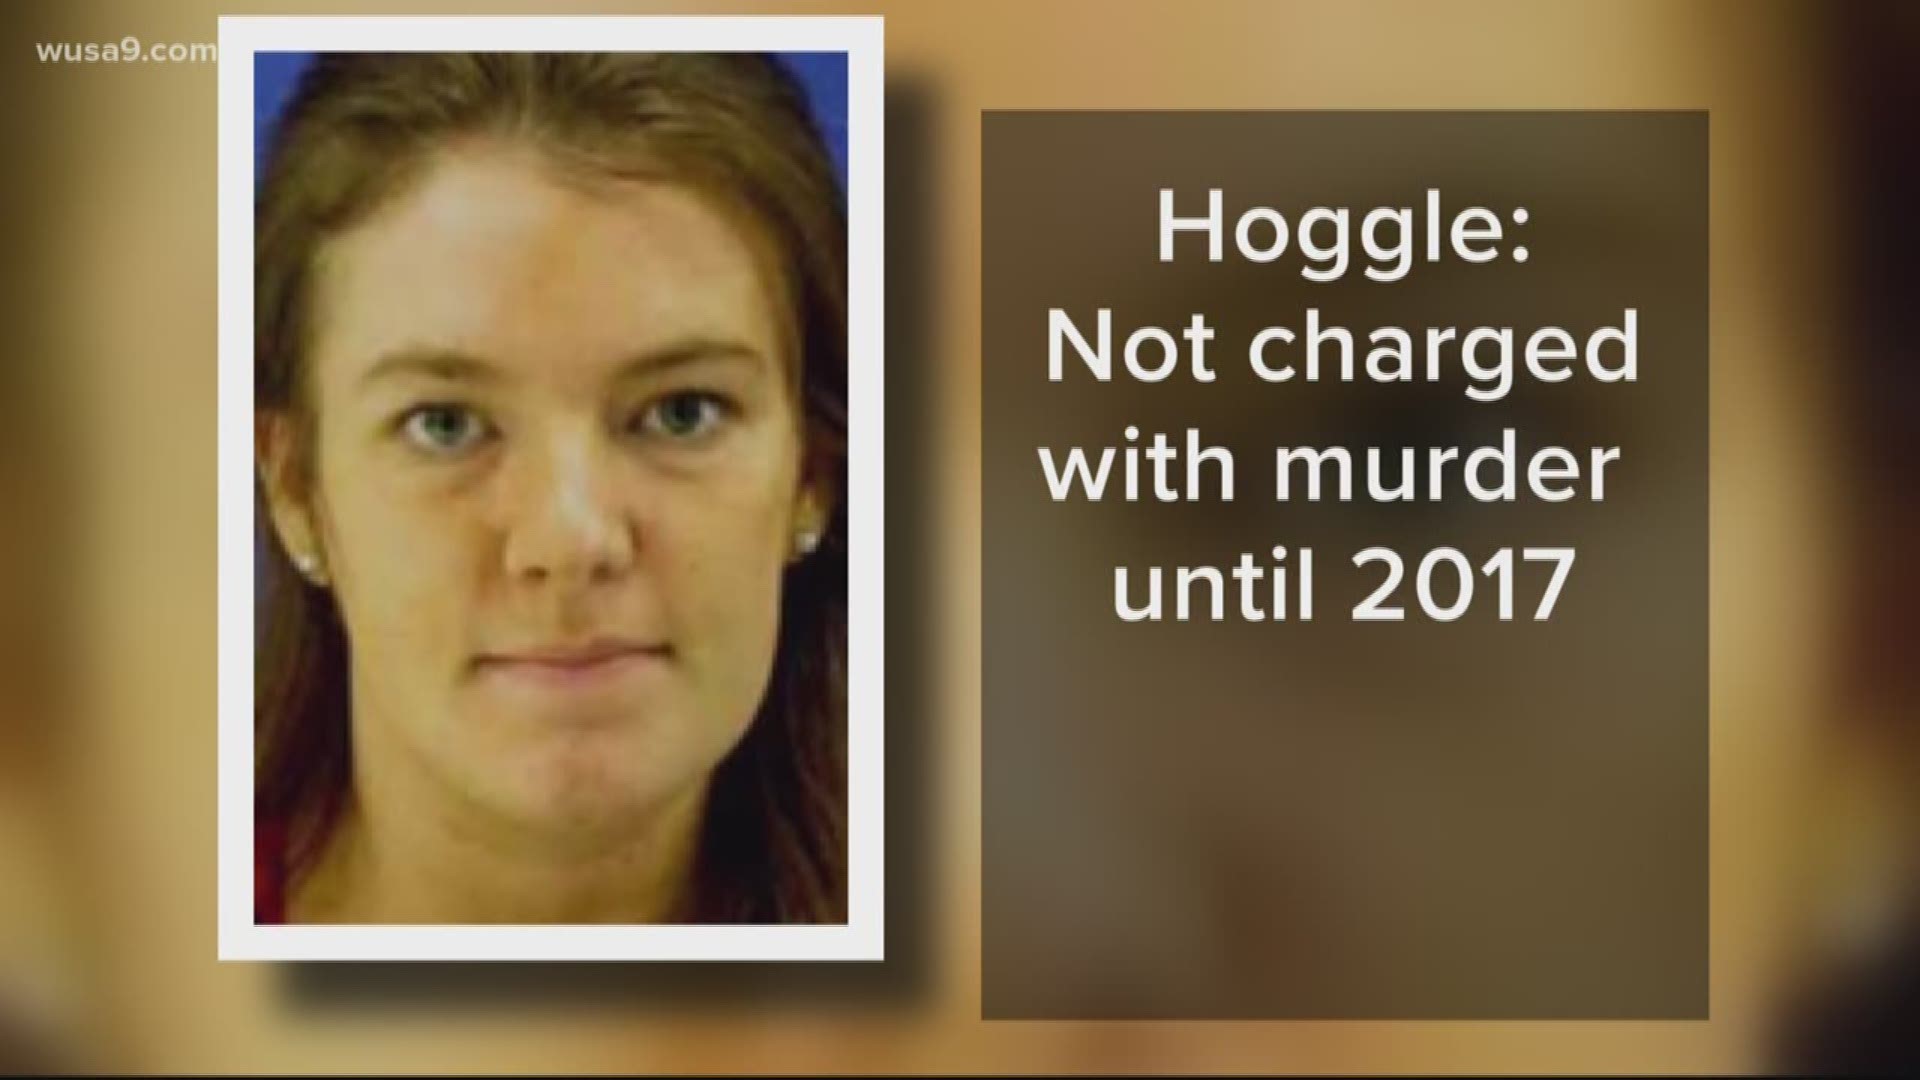 Catherine Hoggle is accused of murdering her two young children Jacob and Sarah, who have been missing since 2014.